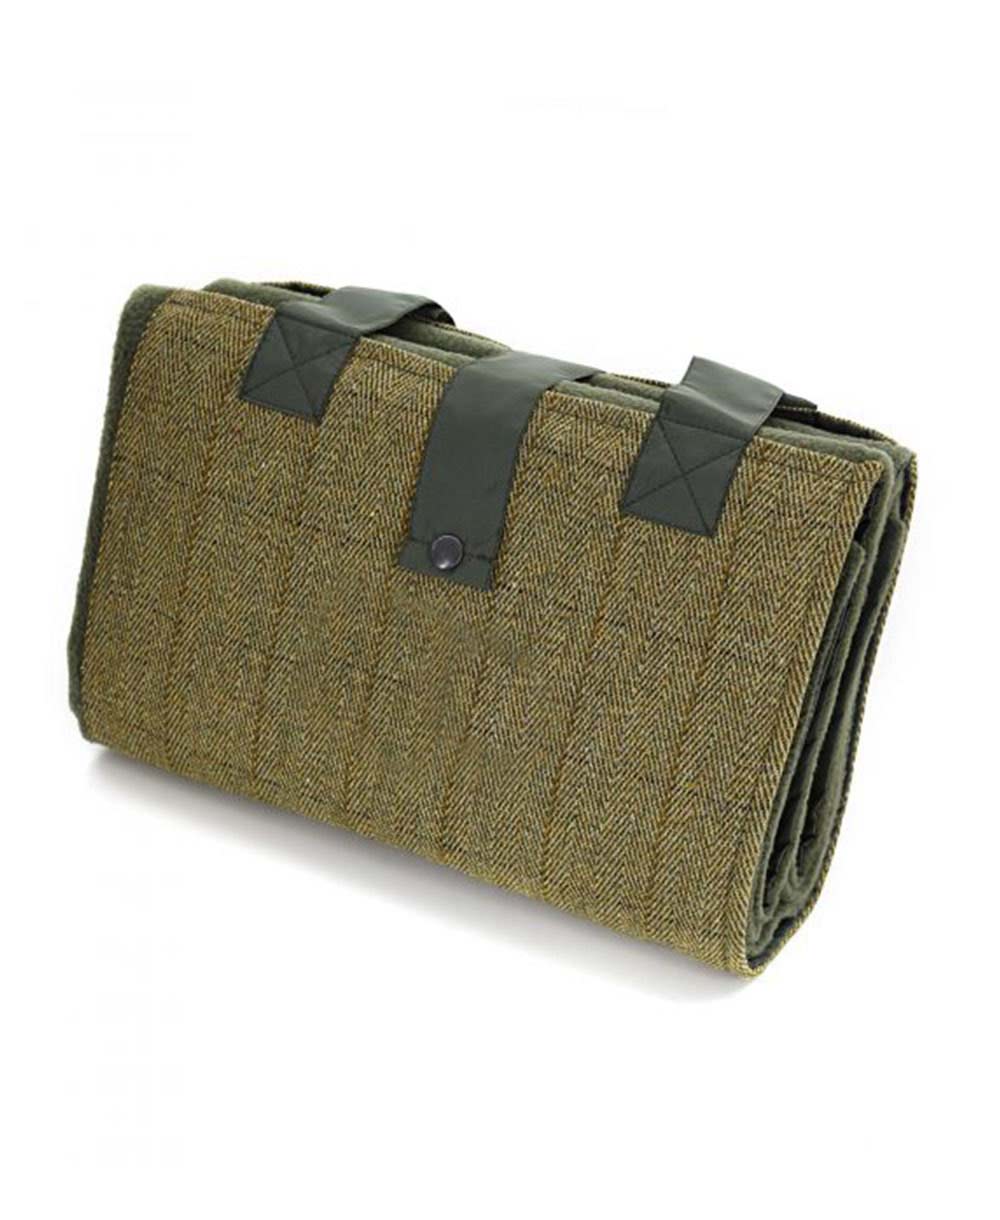 Goodwood Chequered Travel Picnic Rug in Olive Green